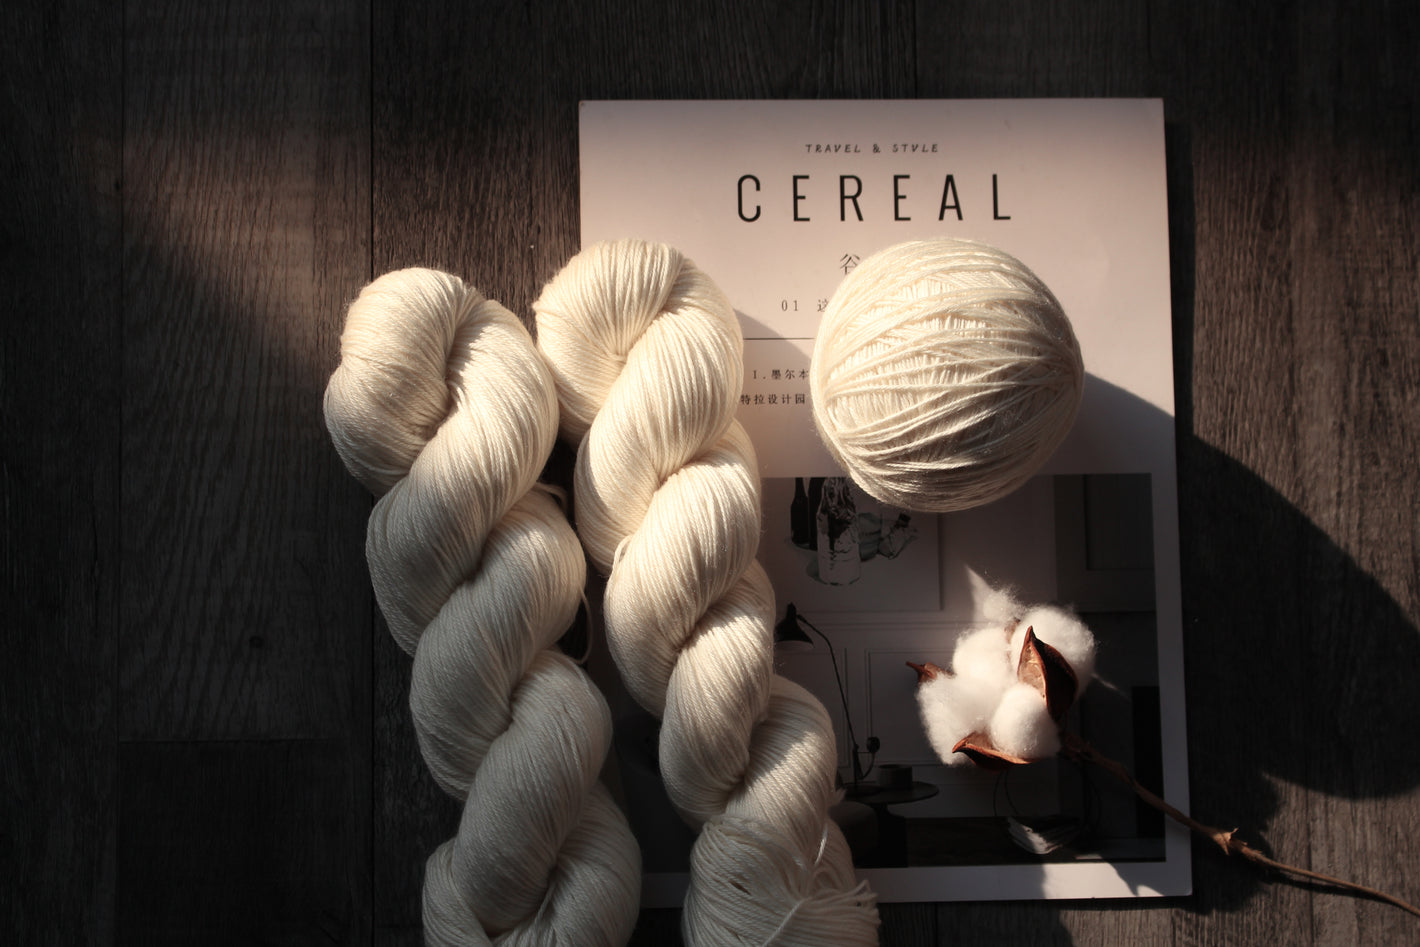 Undyed natural color yarns for hand dyeing – Merino Textiles